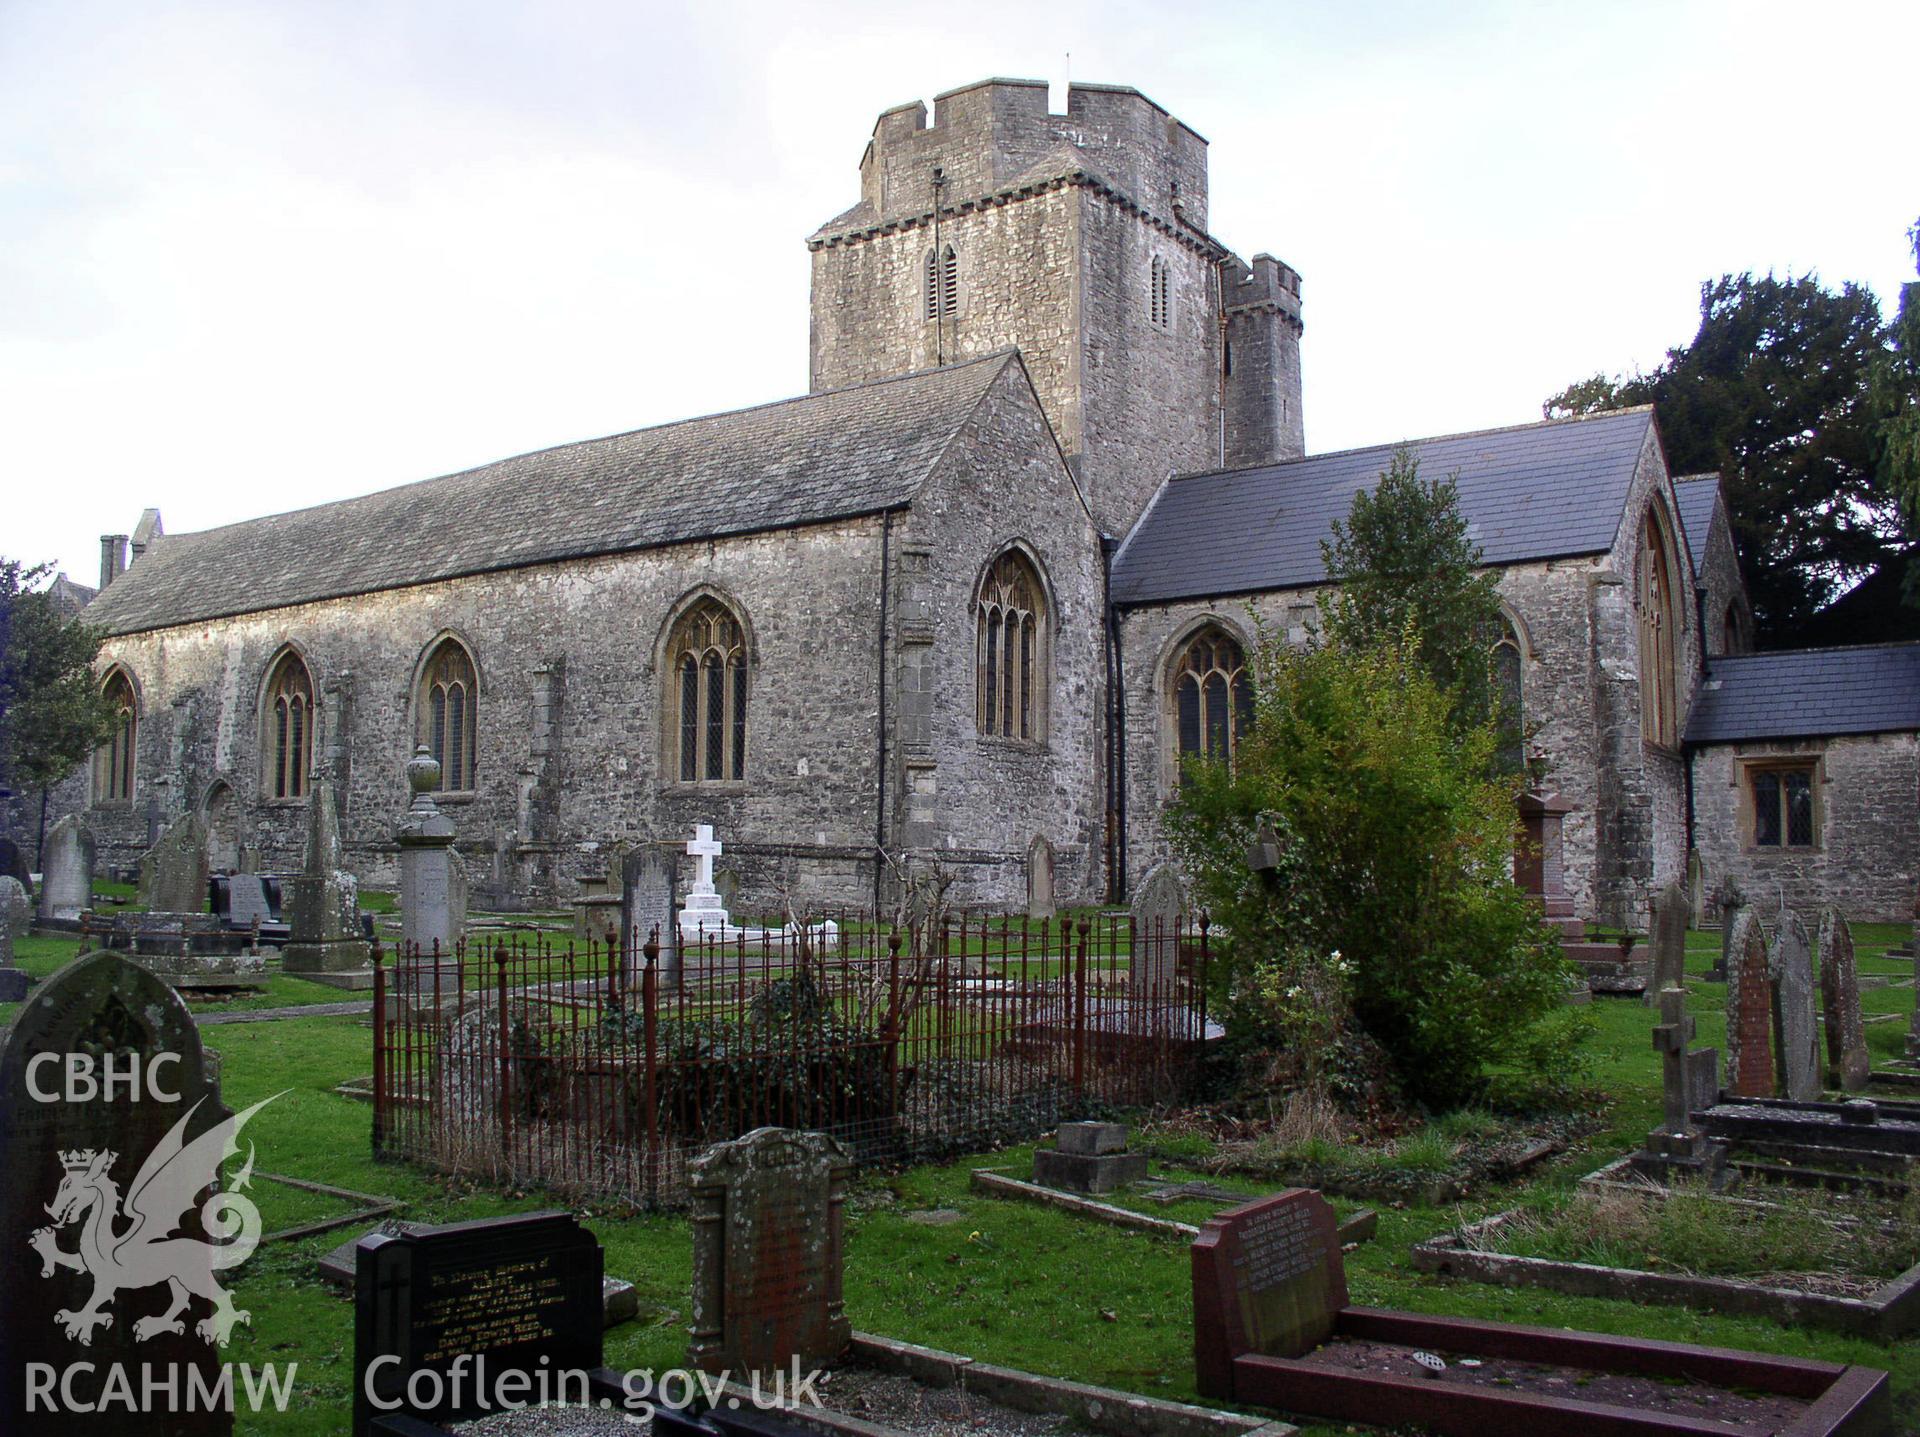 Colour digital photograph showing the exterior of the Church of the Holy Cross, Cowbridge.